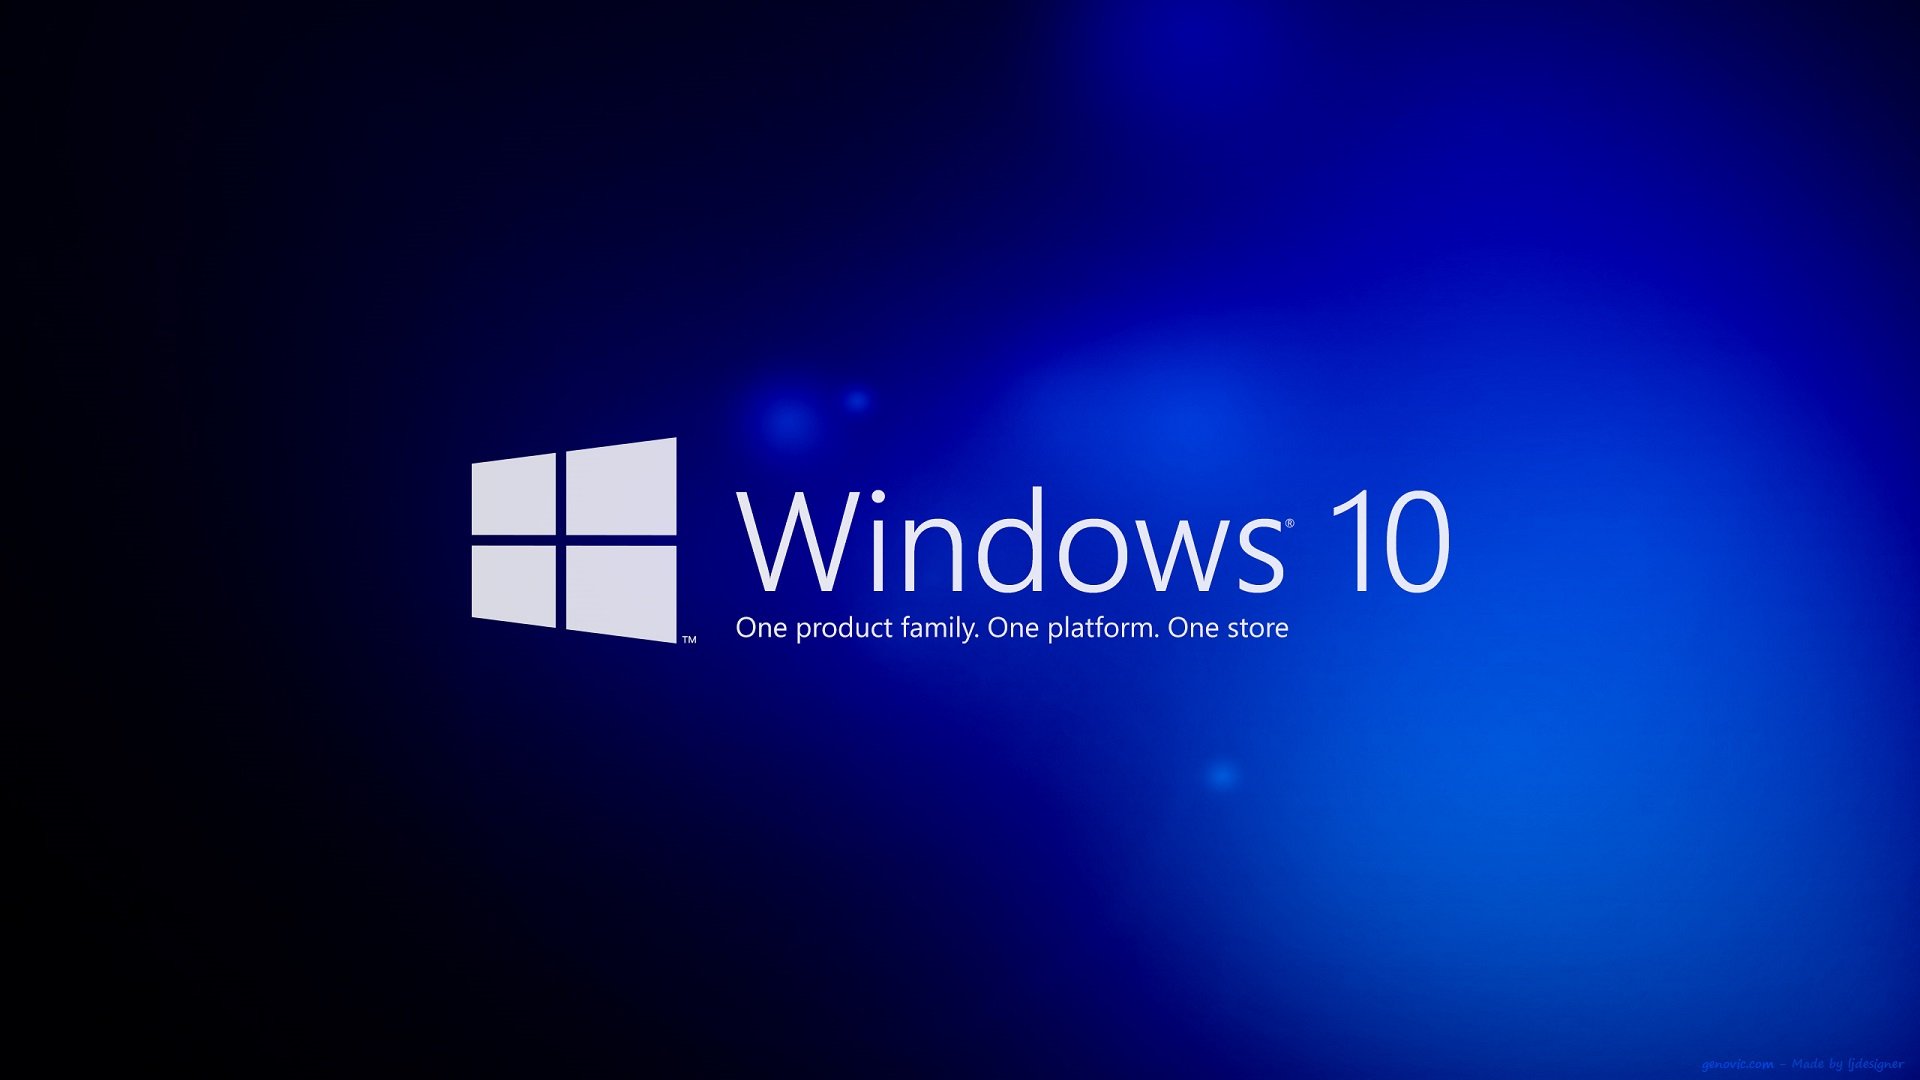 Windows 10 Logo Wallpaper and Theme Pack All for Windows 10 1920x1080